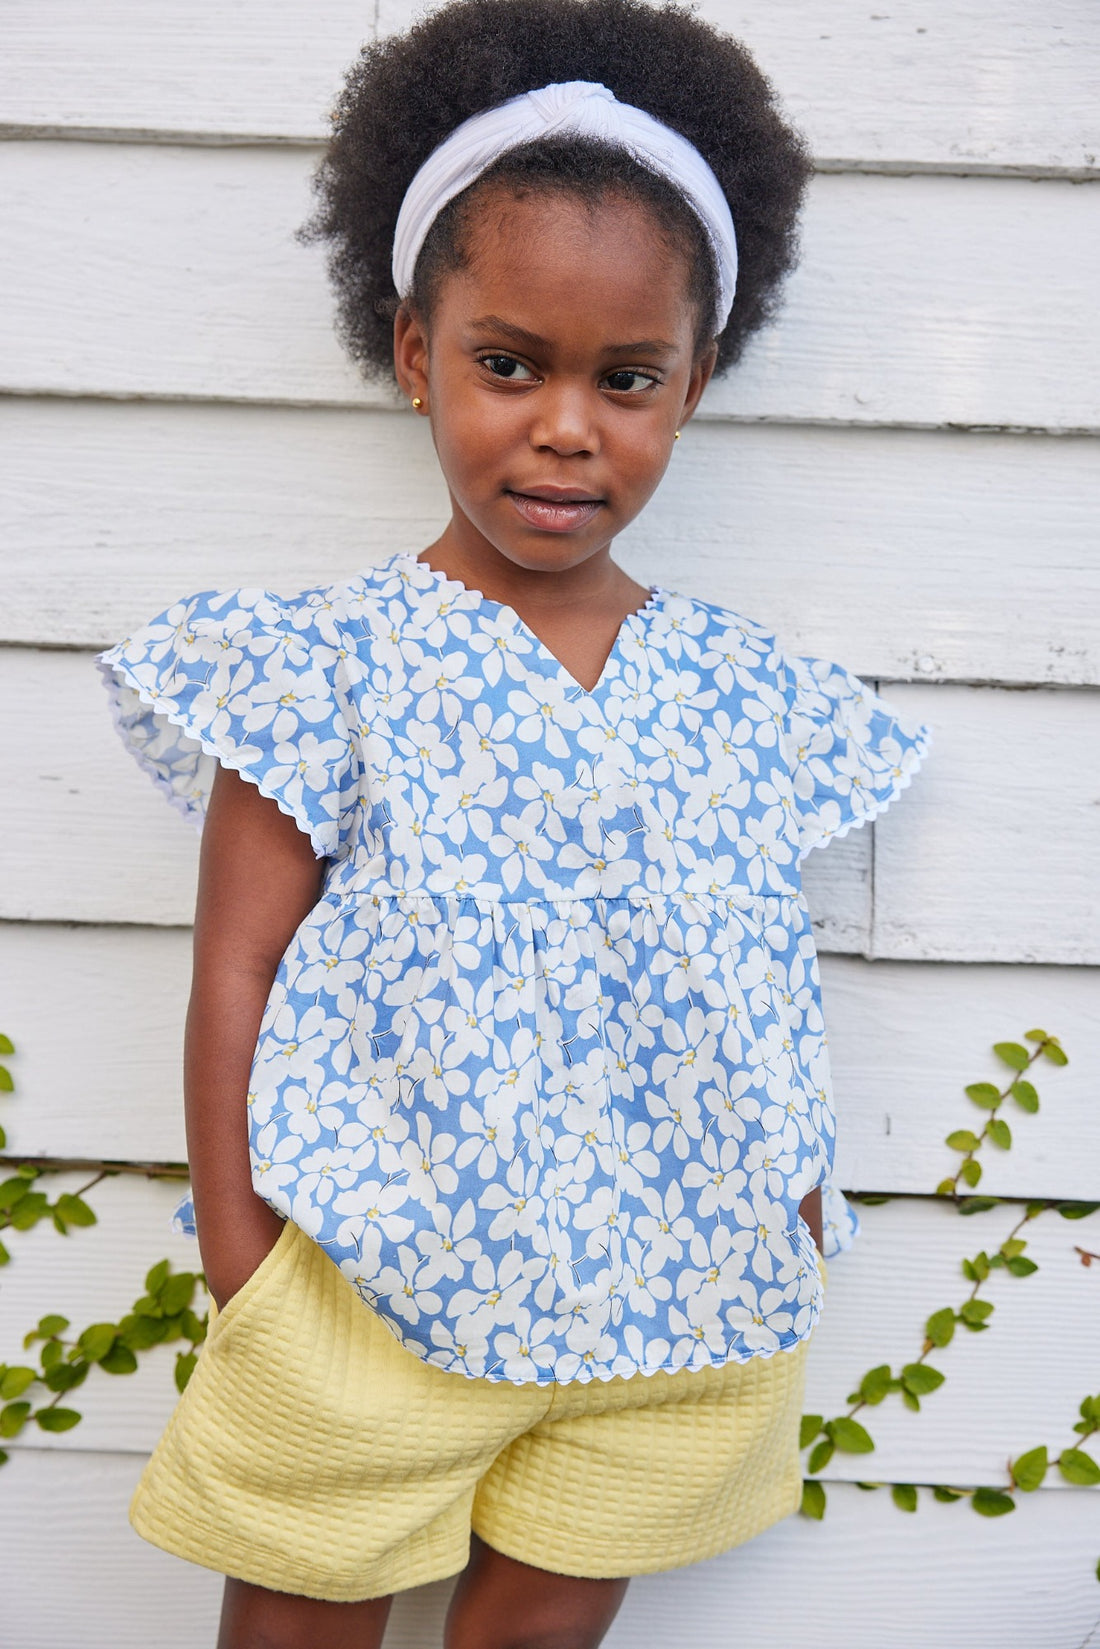 blue floral top for little girls and tweens. v-neck top with white scallop trim along sleeves and bottom of the top. Has a light blue background with white flowers